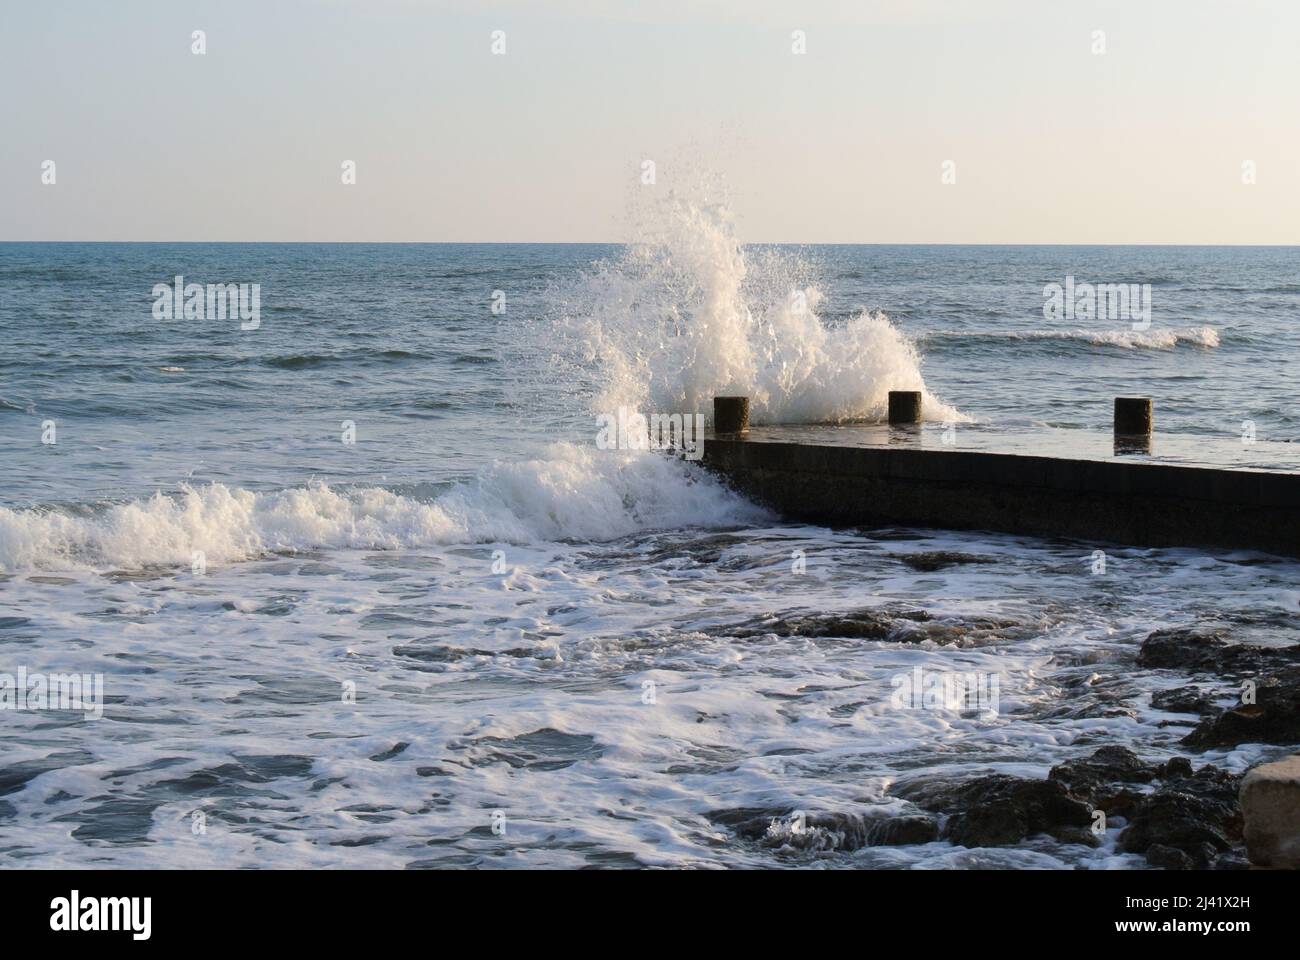 Waves breaking on the dock Stock Photo